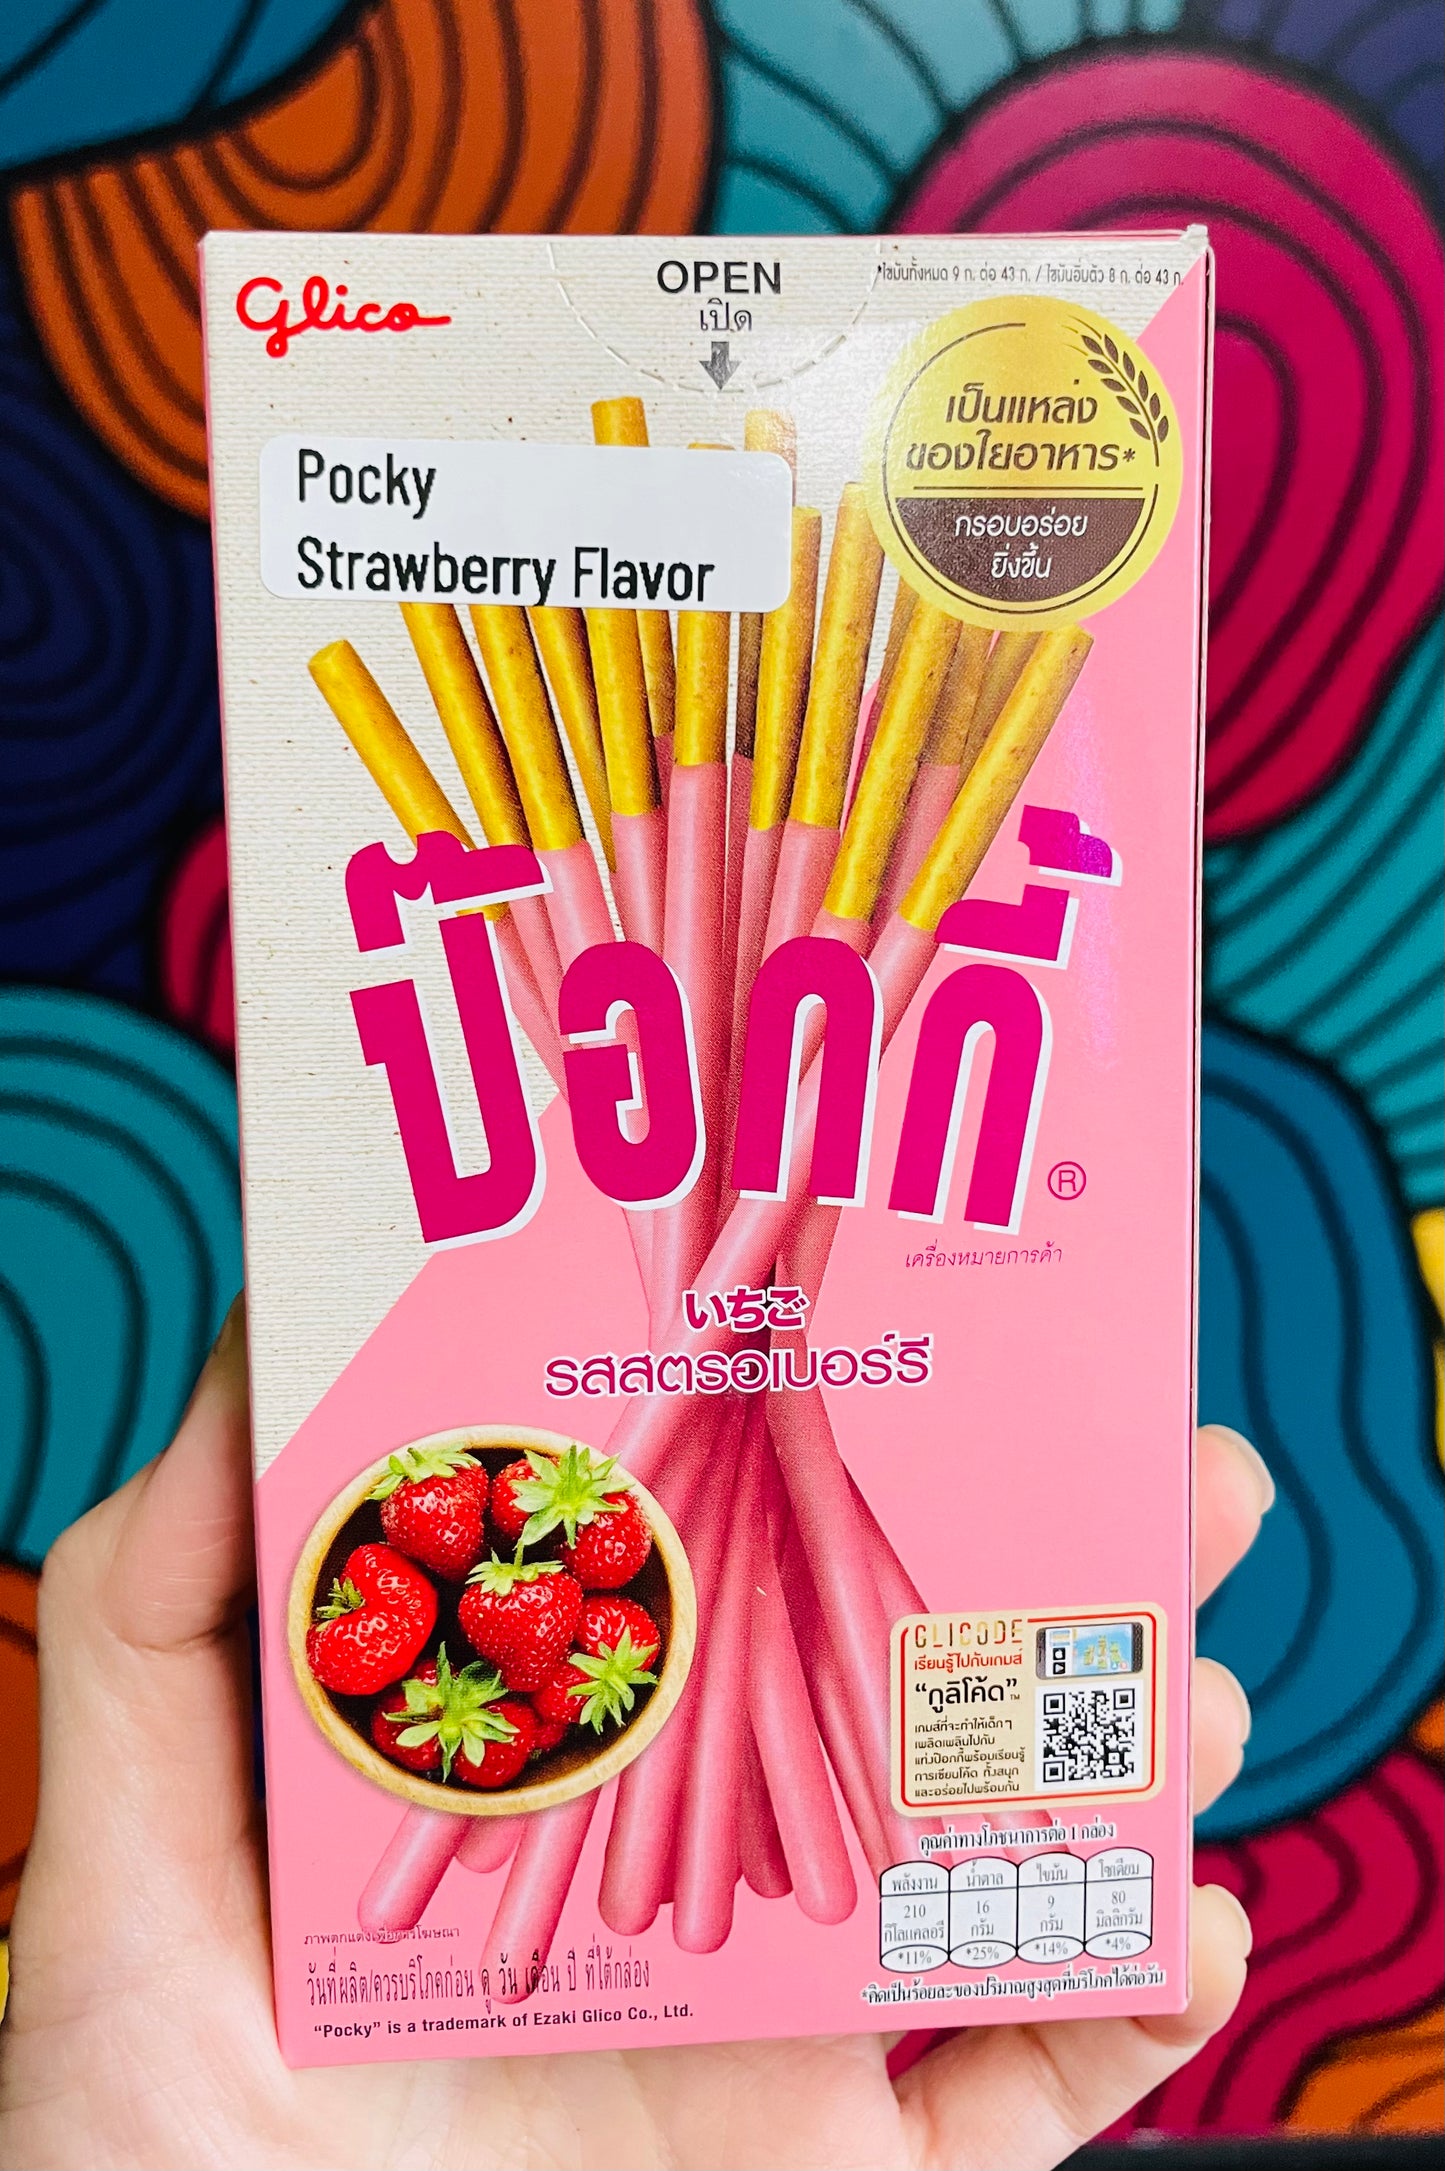 Pocky Biscuit stick - Exotic Snacks